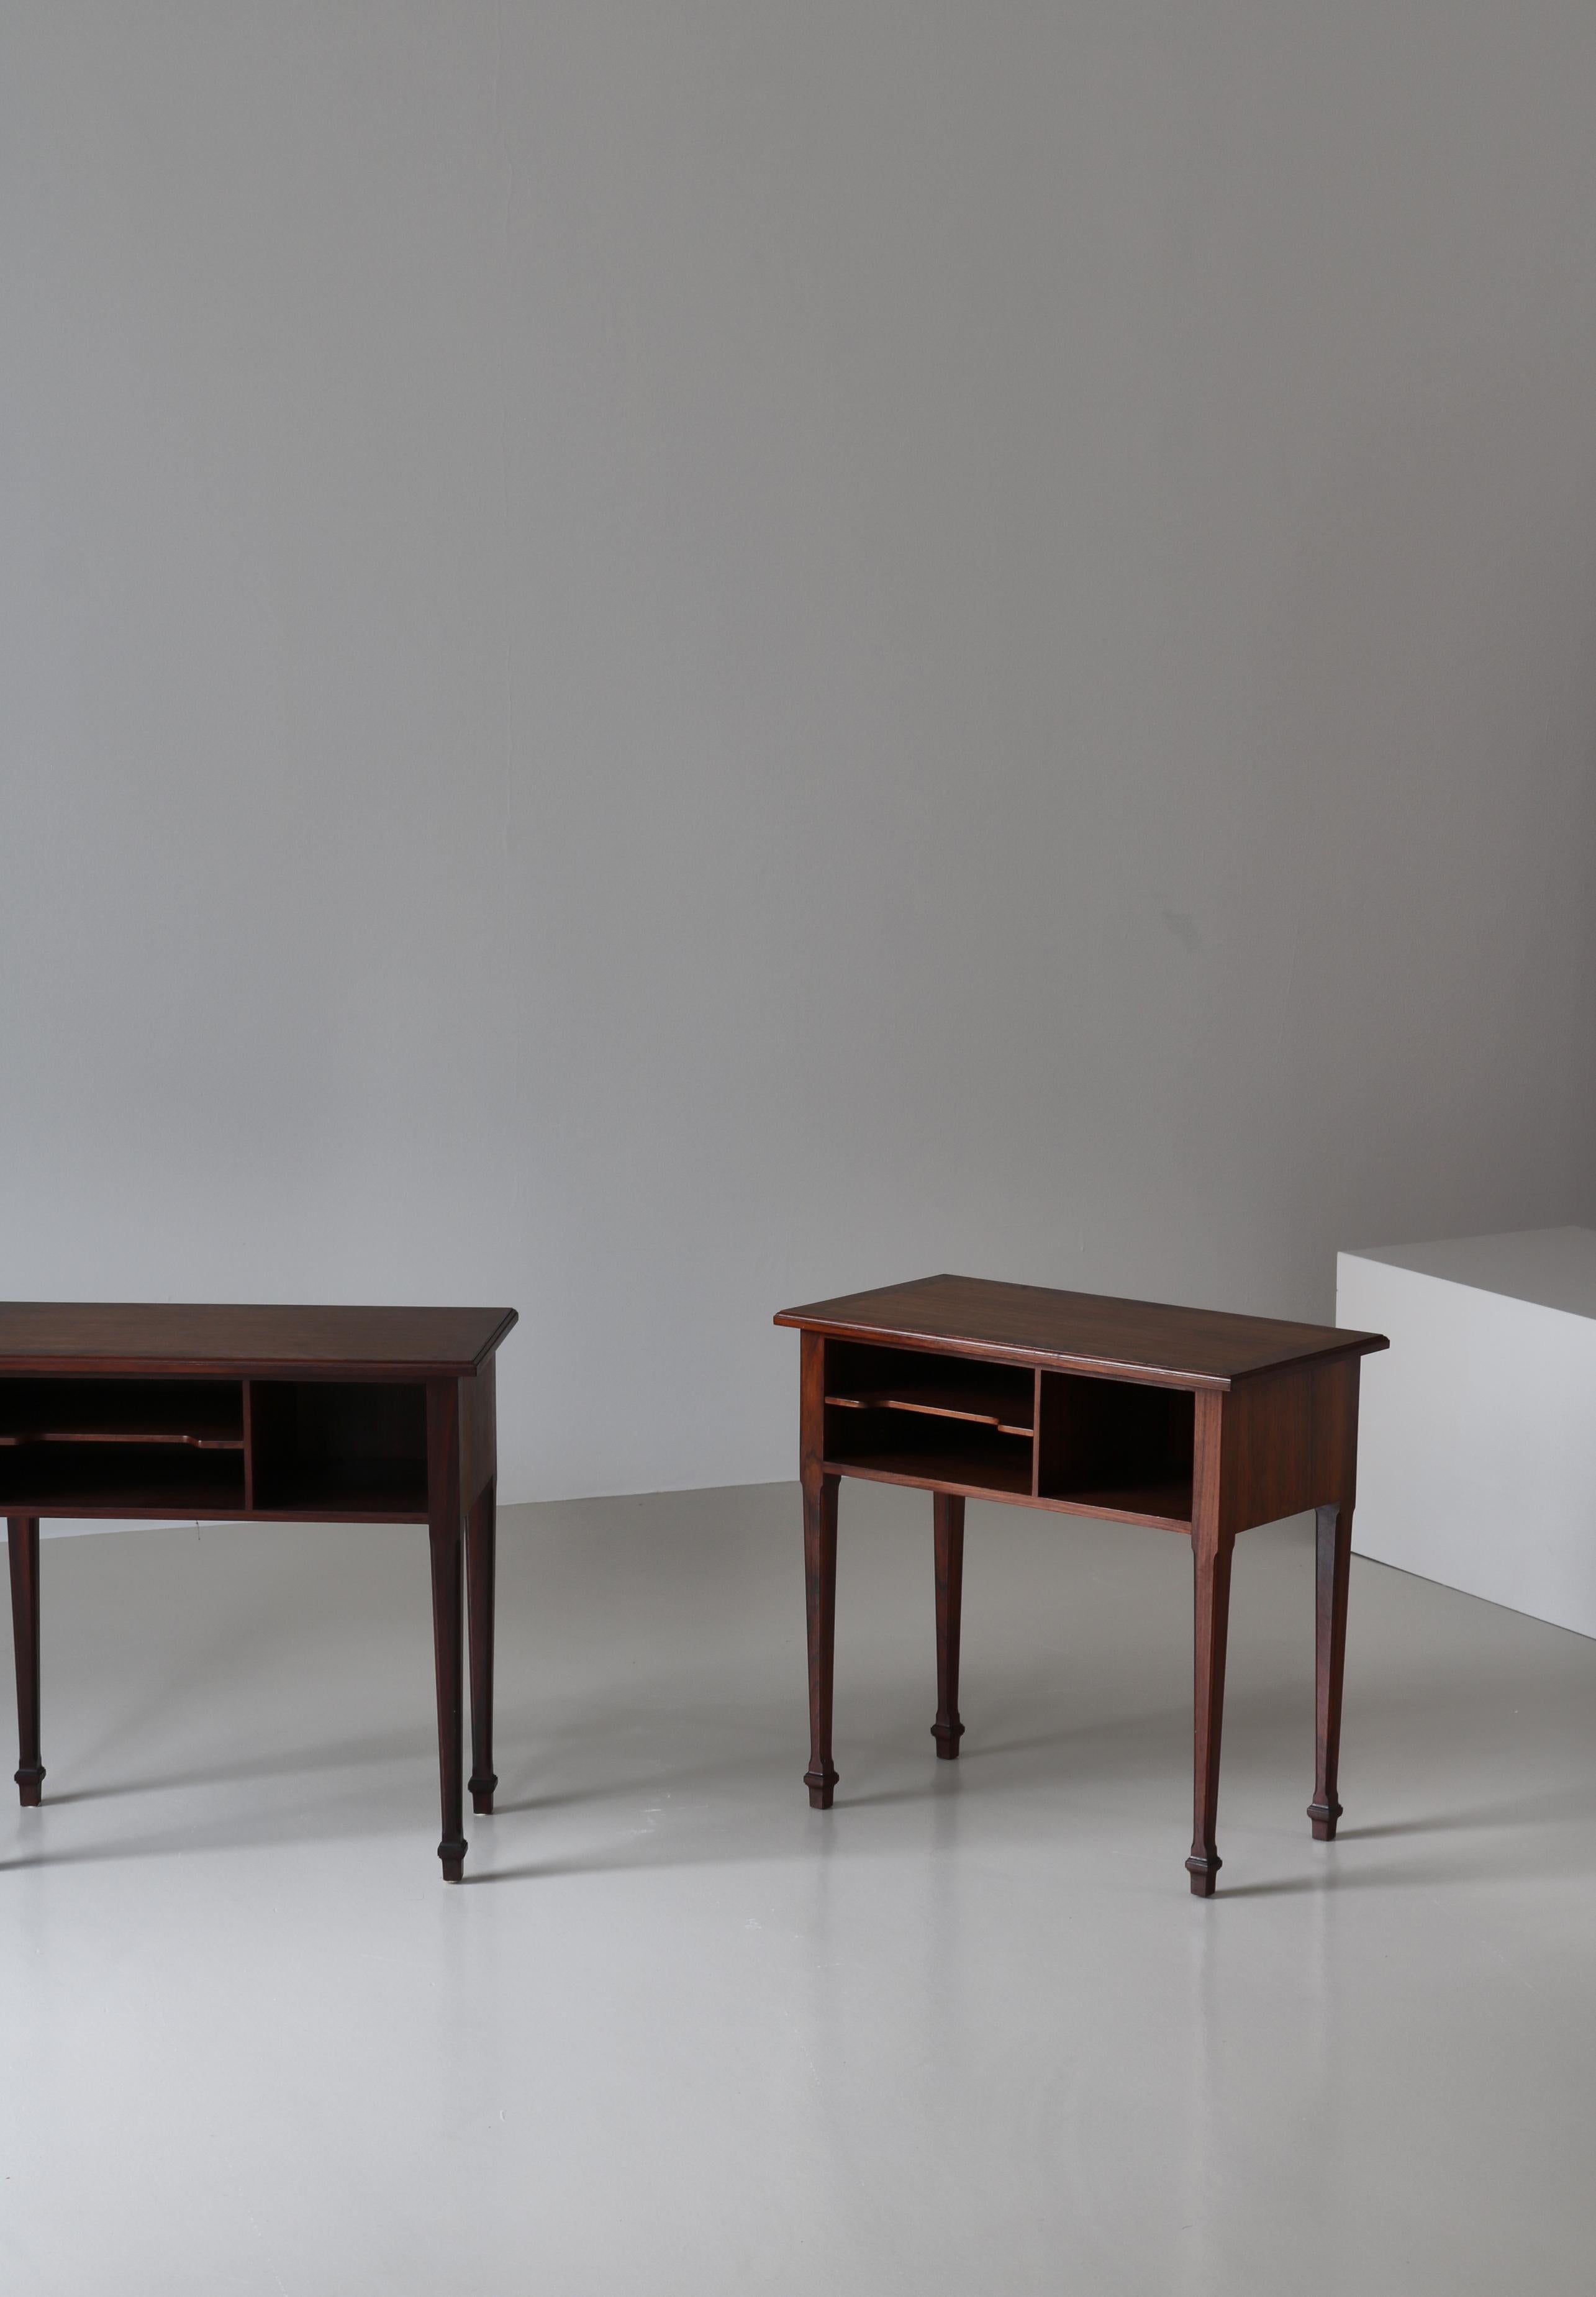 Elegant set of rosewood side tables made in Denmark in the 1930s. Attributed to Ernst Kühn and probably made at Lysberg, Hansen & Therp, Copenhagen. Beautiful profiled edges and tapered legs.